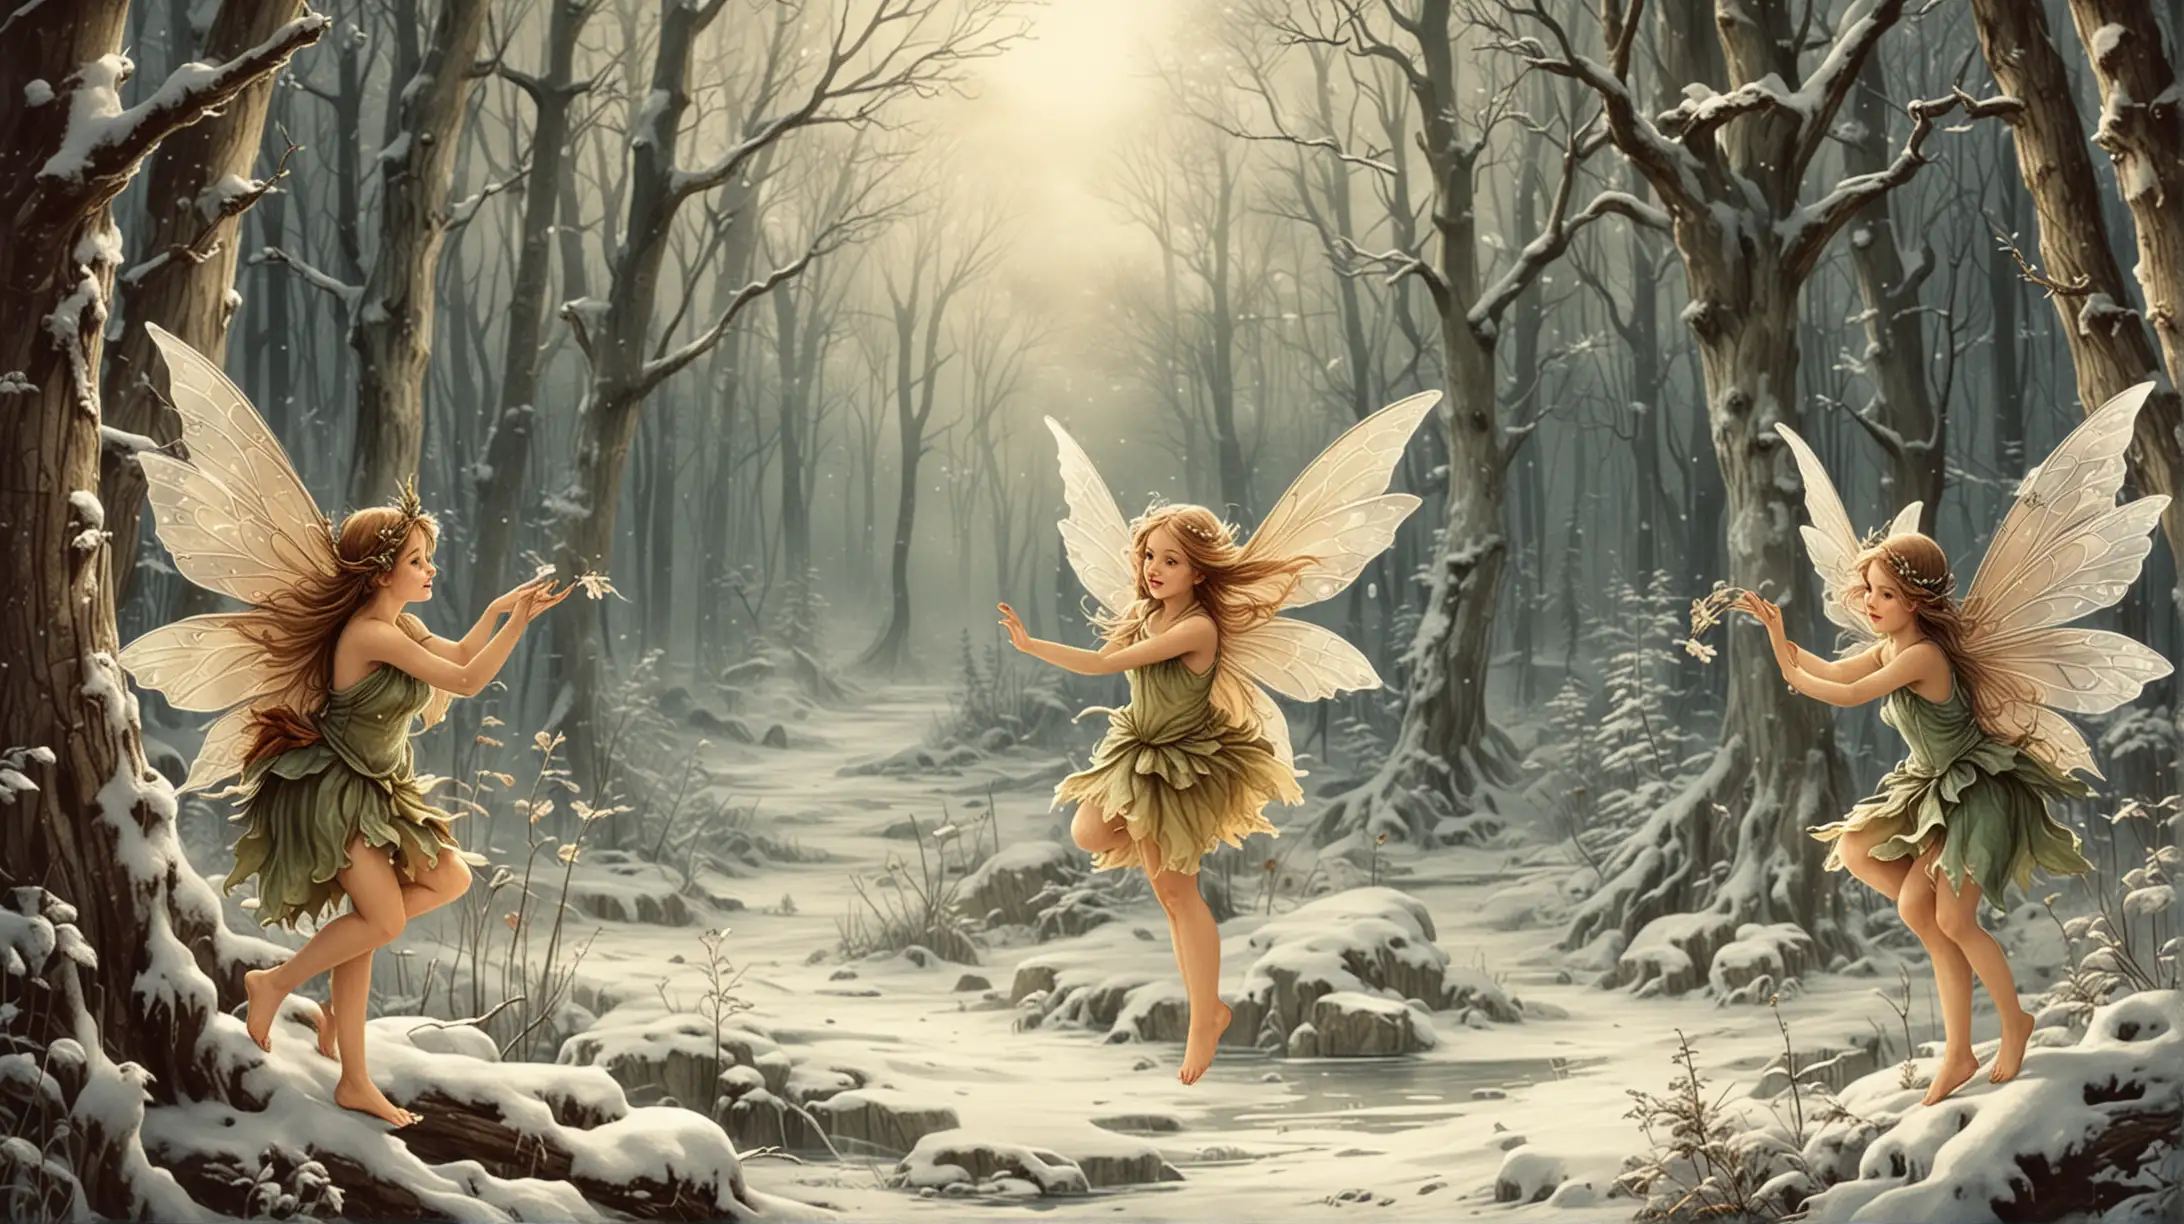 Enchanting Fairies in a Vintage Winter Forest Illustration